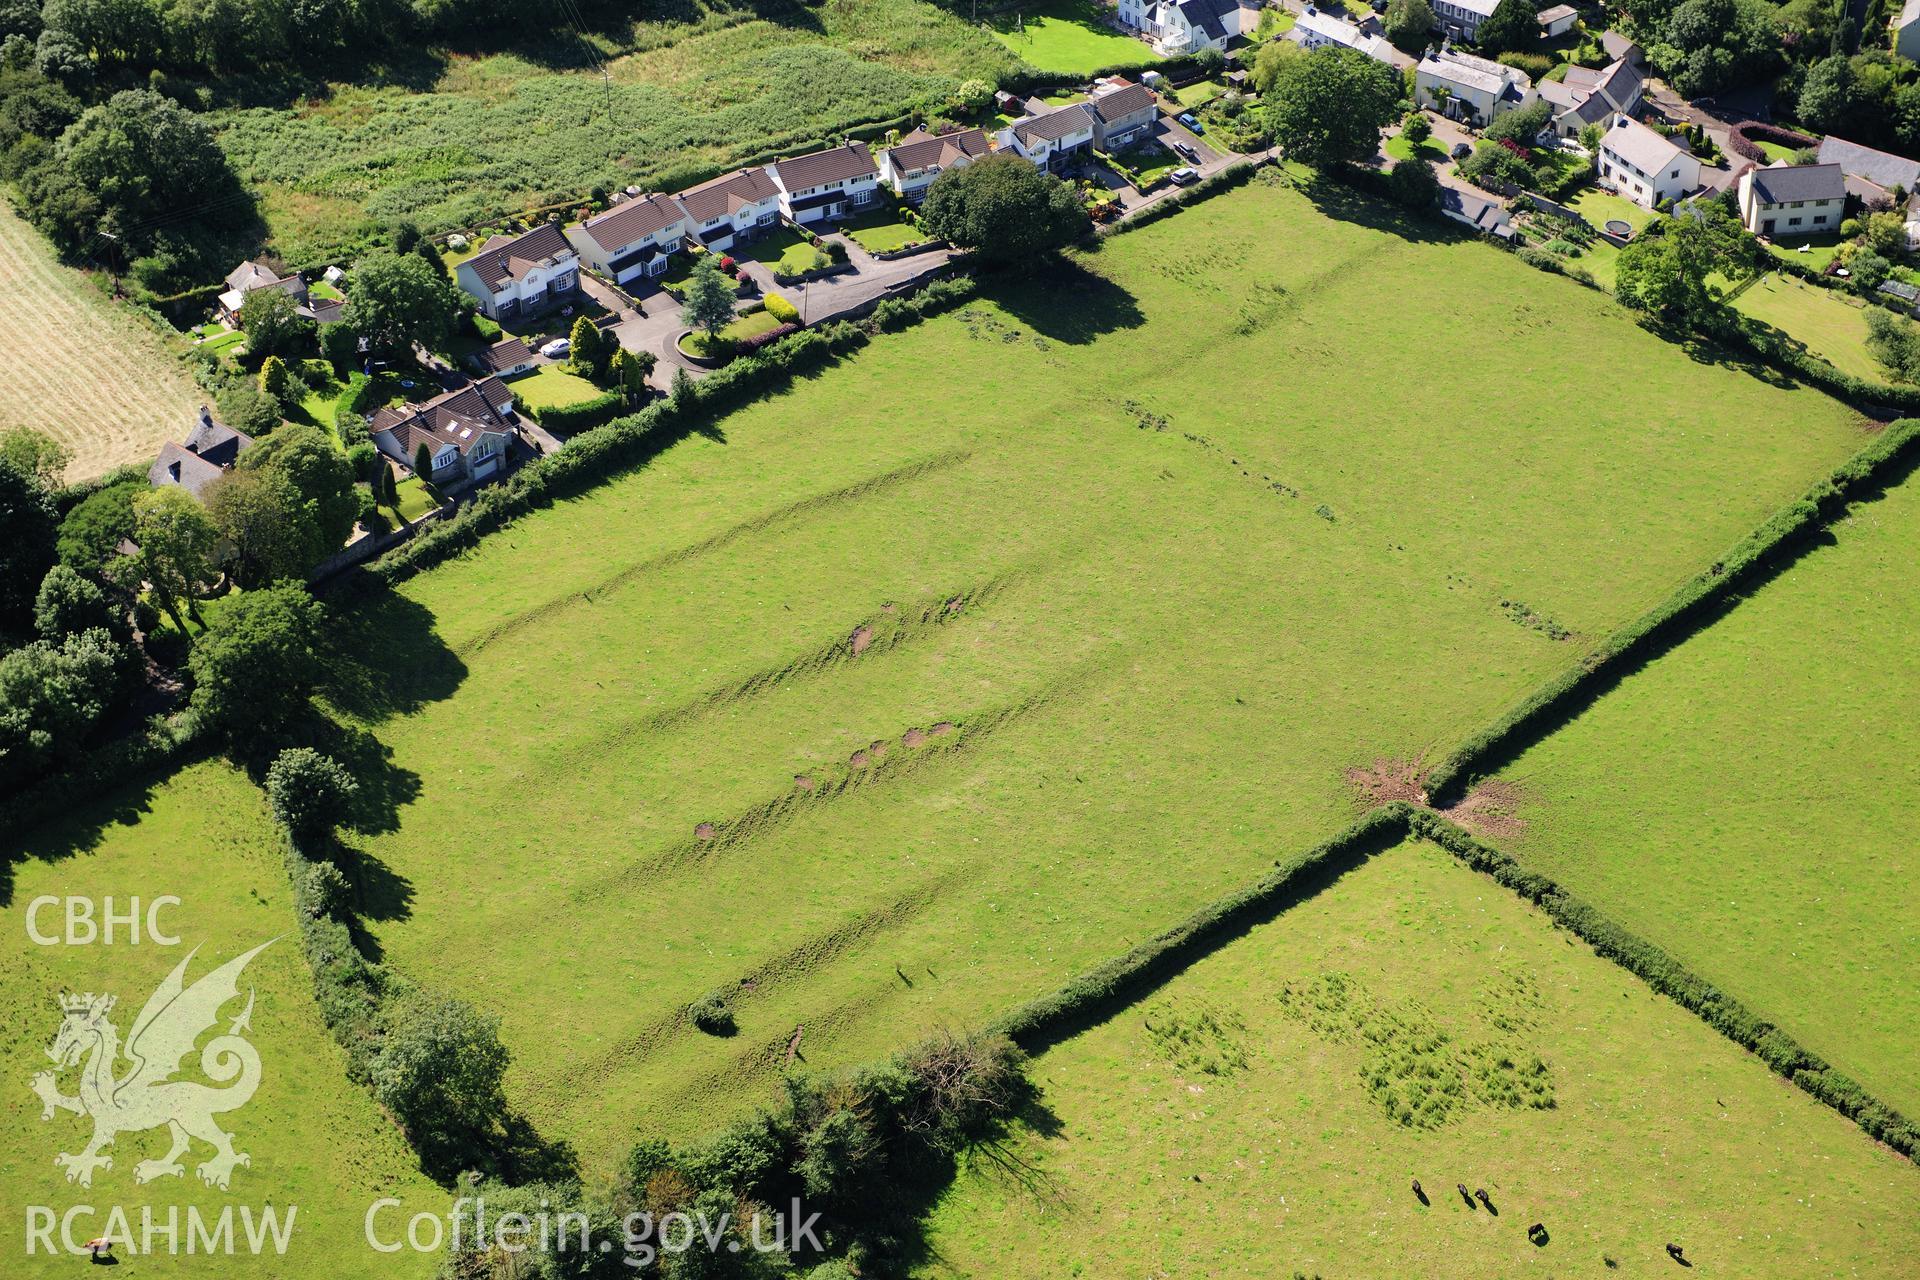 RCAHMW colour oblique photograph of Llanblethian medieval strip fields, earthworks. Taken by Toby Driver on 24/07/2012.